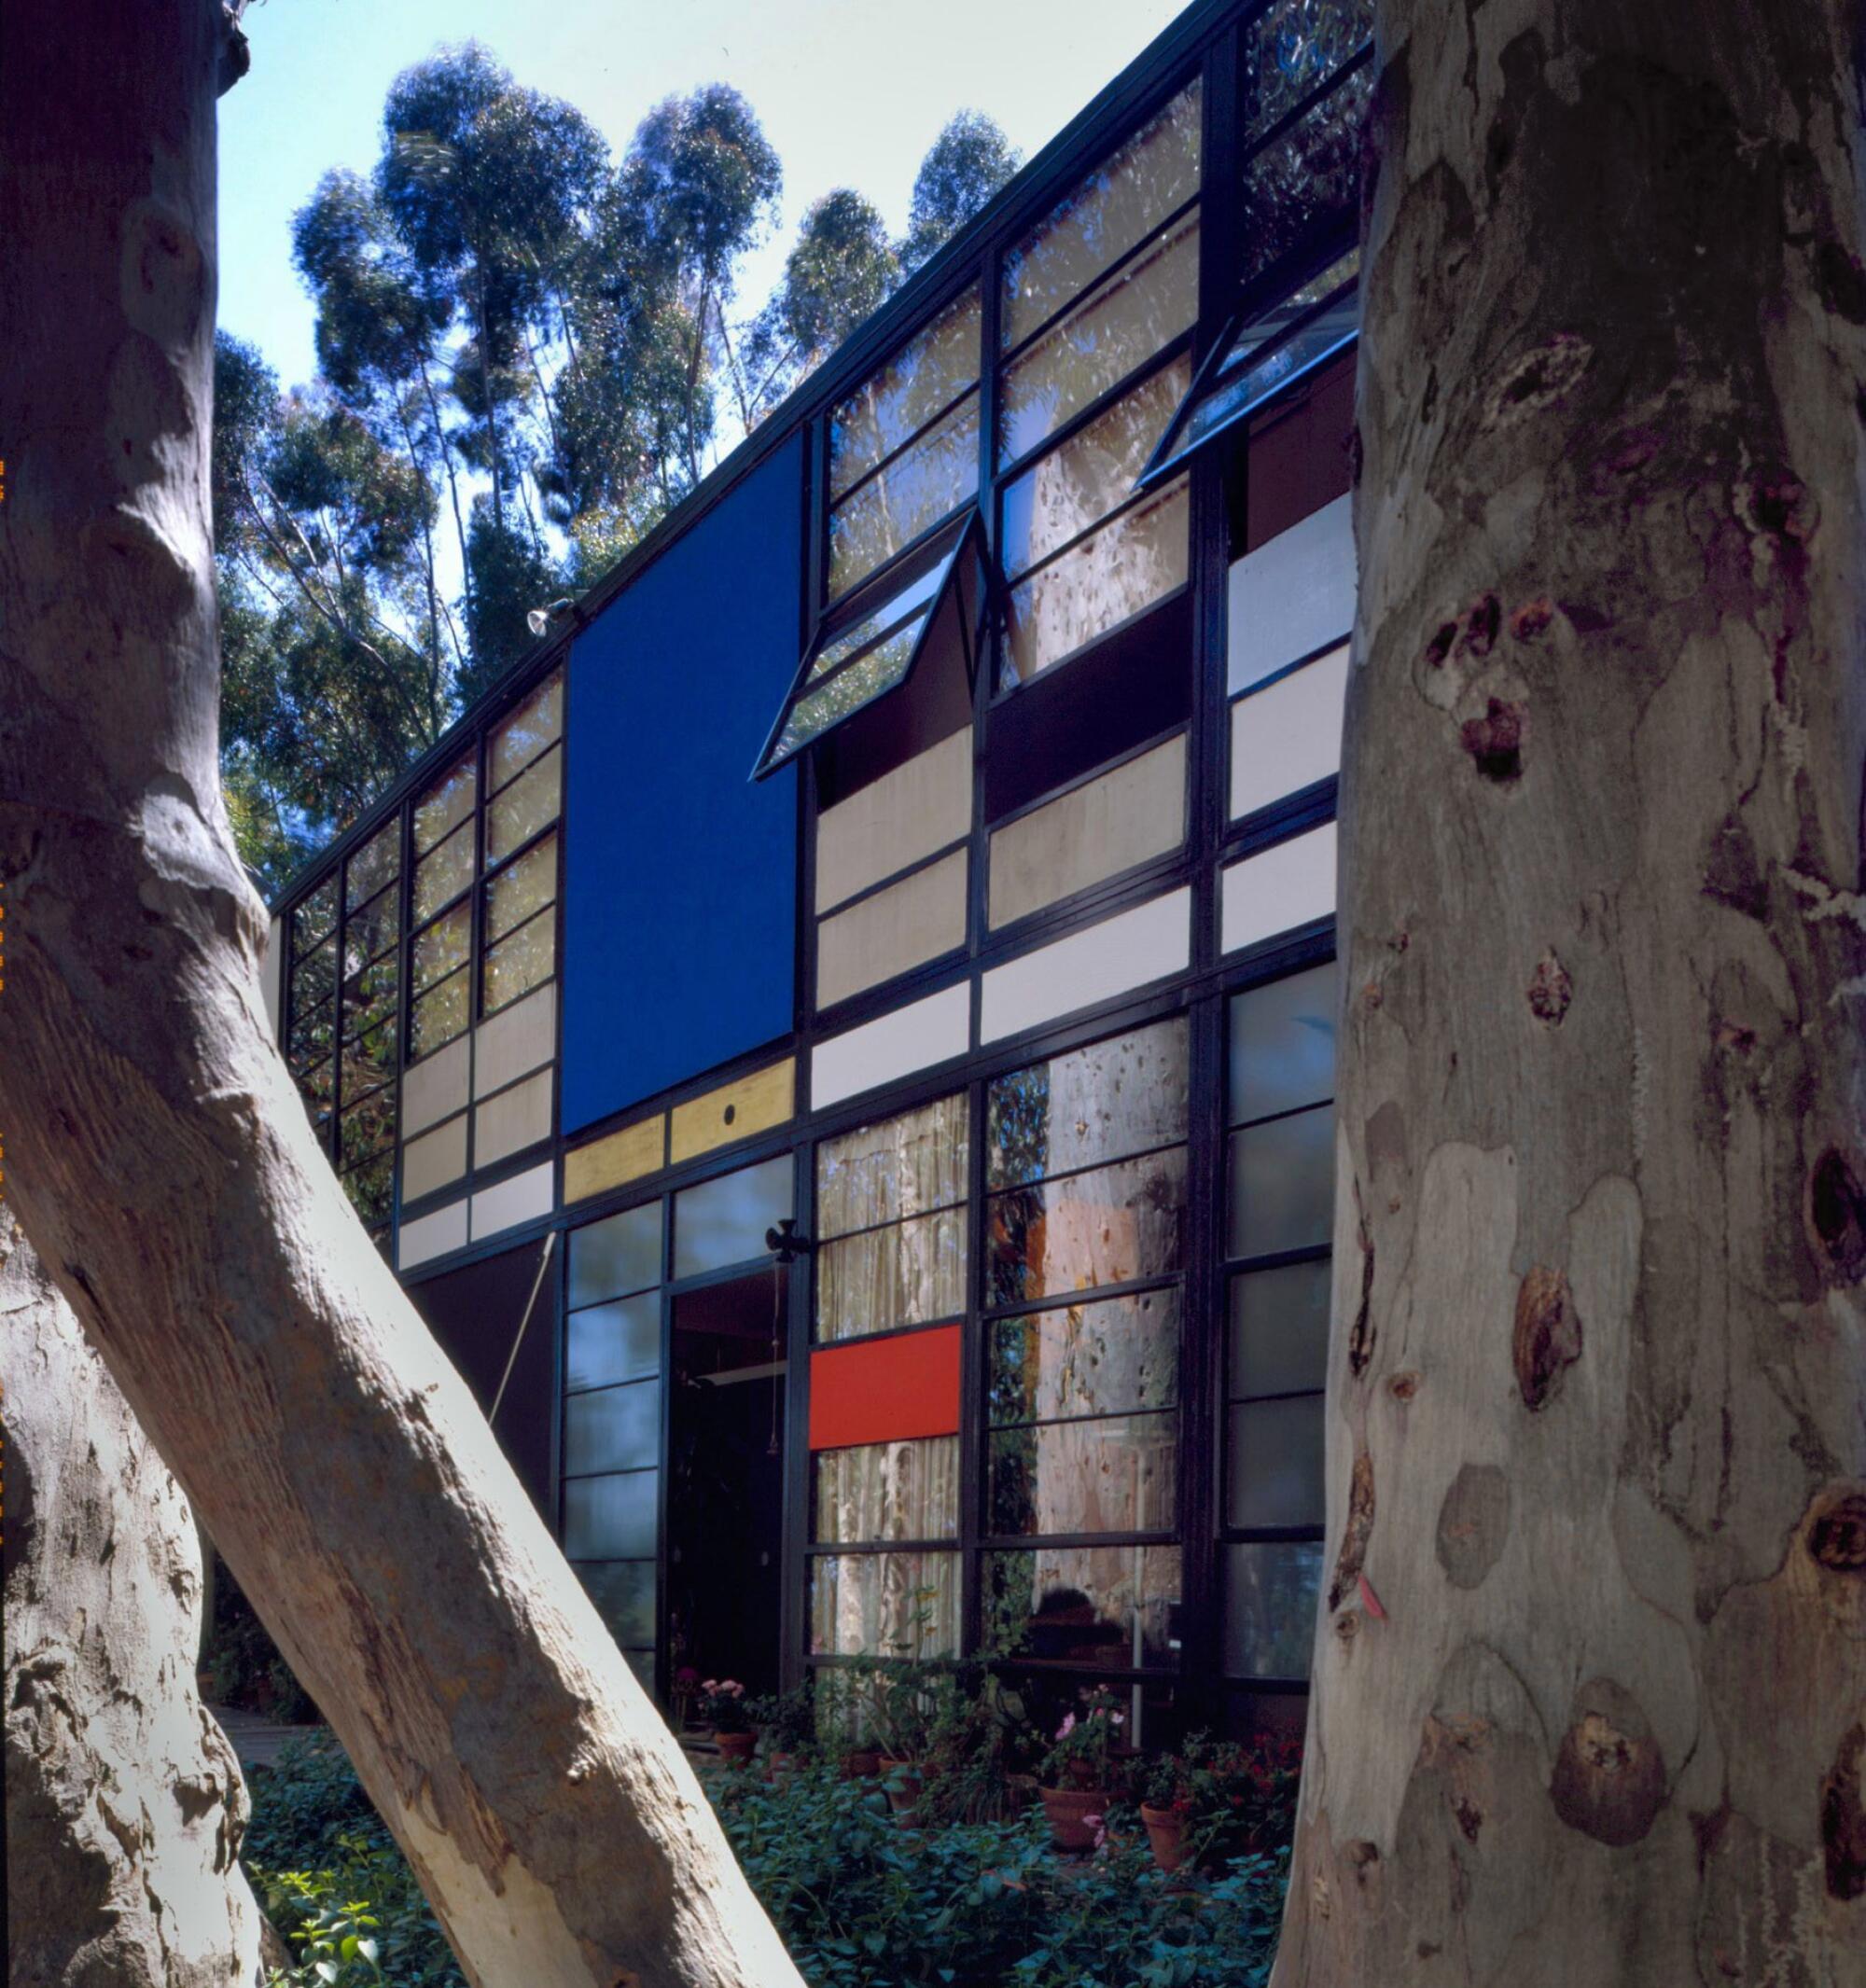 The Eames House facade — a grid of rectangular window panels, some splashed with color — is seen through trees.